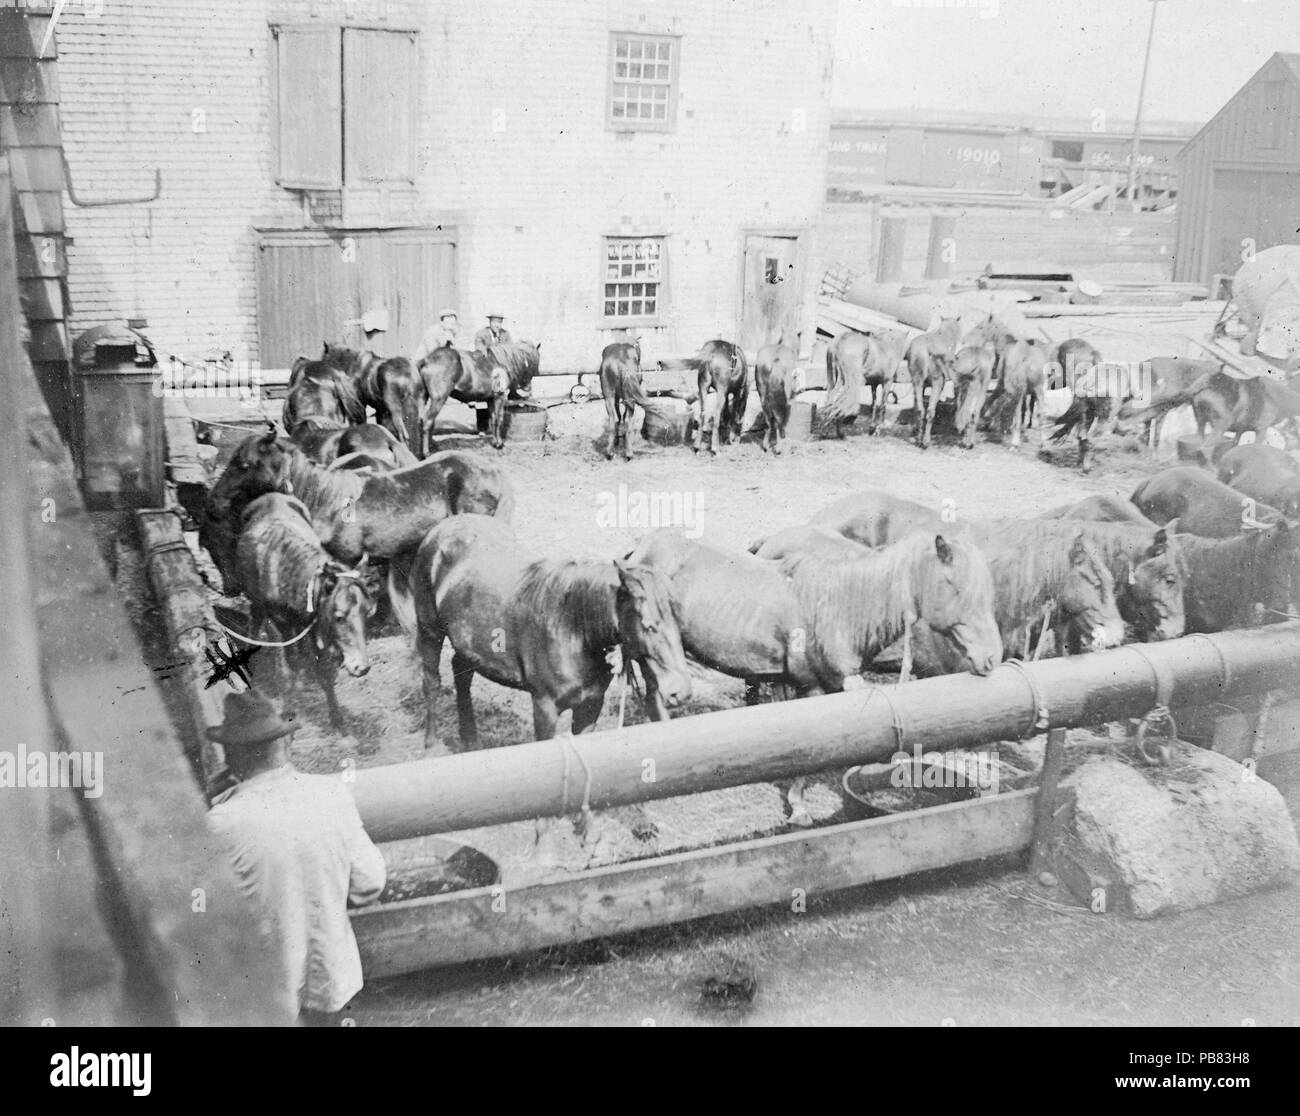 . English: Sable Island Ponies after being unloaded from Steamer, to be sold at Auction – Halifax, Nova Scotia, Canada, about 1902. After the appointment of a marine superintendent to Sable Island in 1801, horses were routinely shipped off the island and sold at auction in Halifax, as well as in New England and Newfoundland. Valued for their strength and endurance, these small animals were a familiar sight on the streets of Halifax well into the twentieth century. circa 1902 1282 Sable Island Ponies after being unloaded from Steamer, to be sold at Auction, Halifax, Nova Scotia, Canada, ca. 190 Stock Photo